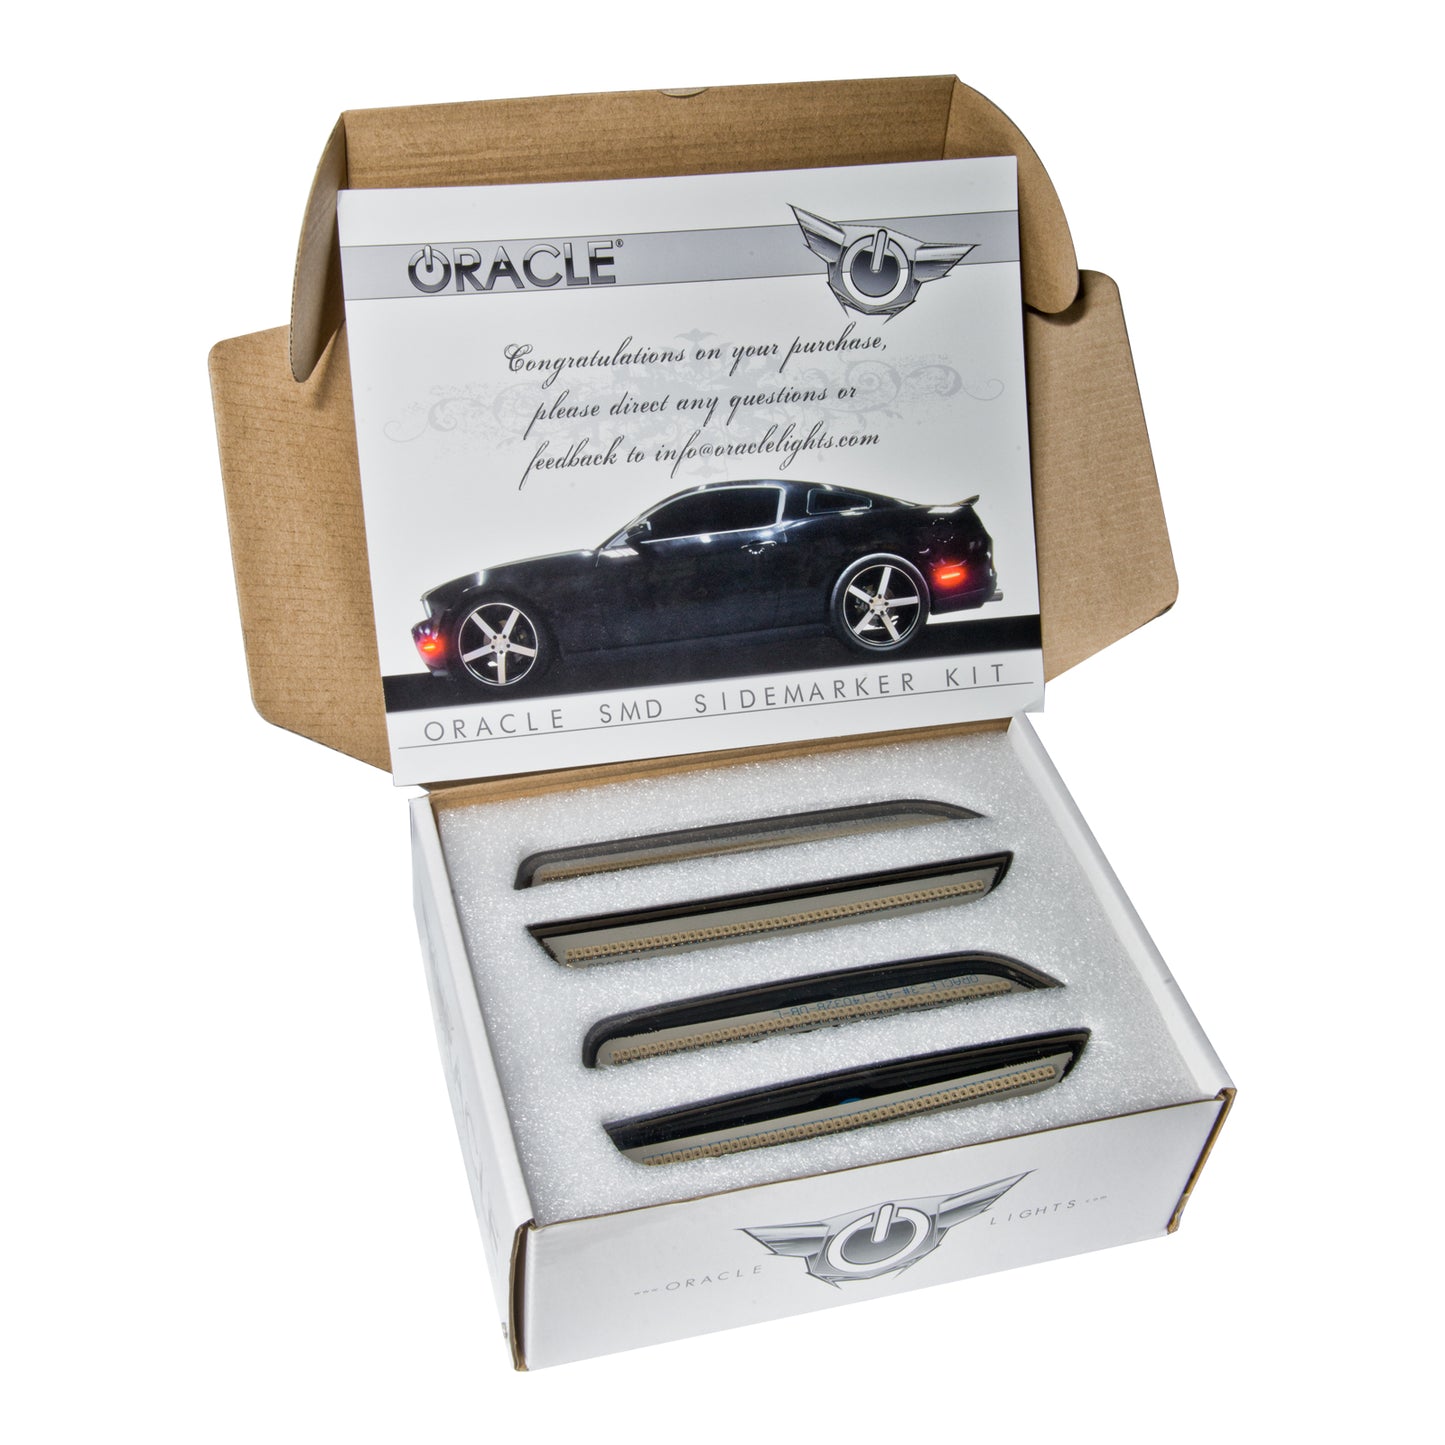 Oracle Lighting 9700-019 - 2010-2014 Ford Mustang Concept Sidemarker Set - Clear - No Paint